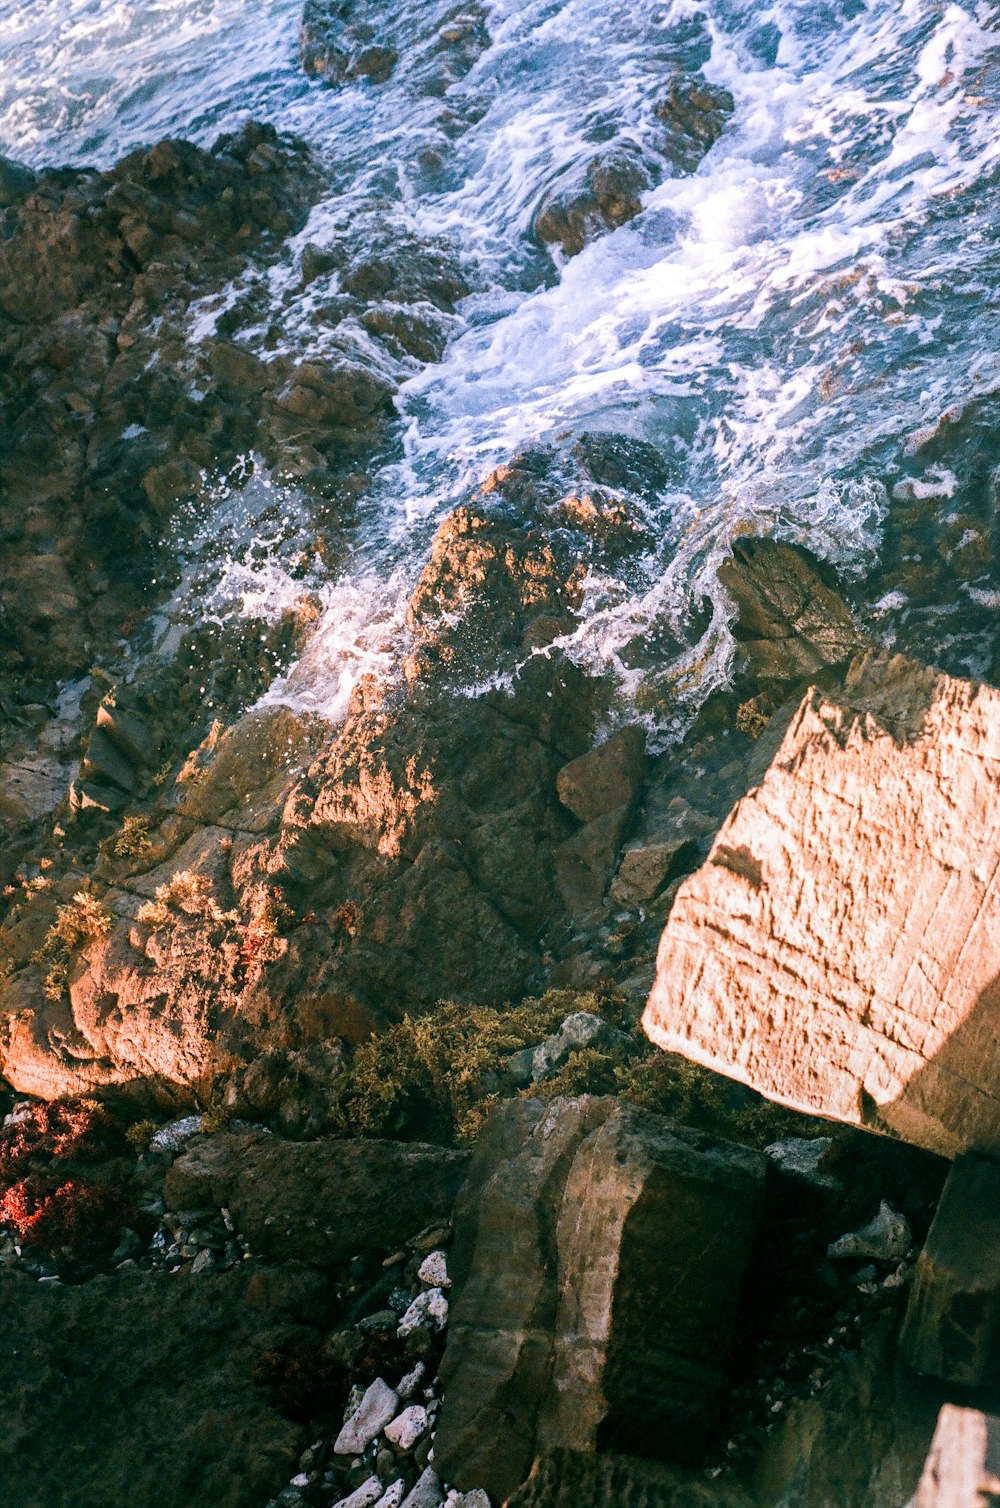 brown rock formation near body of water during daytime